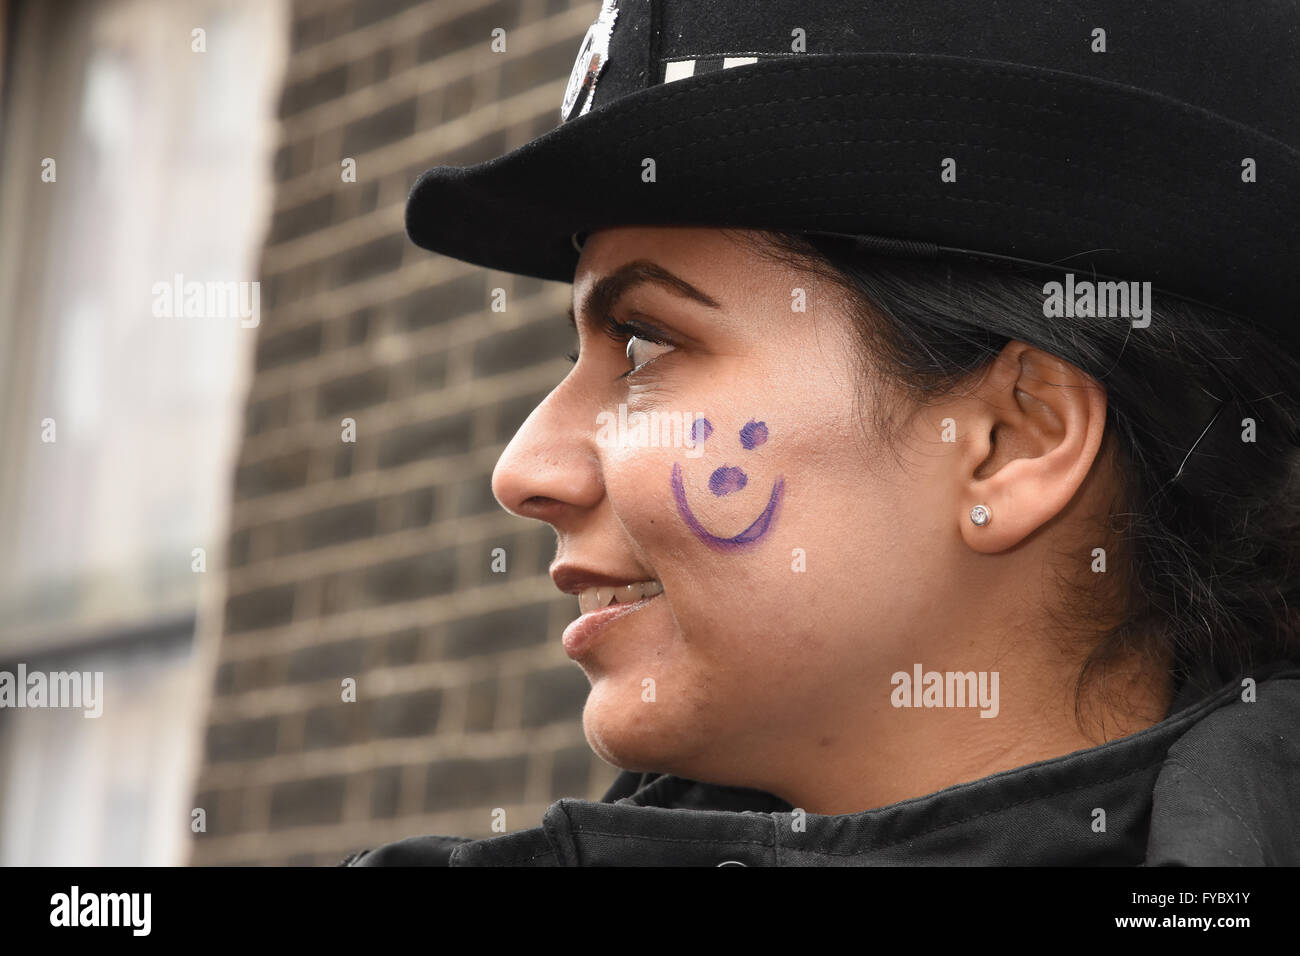 Smiling Female Community Liaison Police Officer,with smiley face painting,Anti Austerity March,Gower Street,London UK Stock Photo